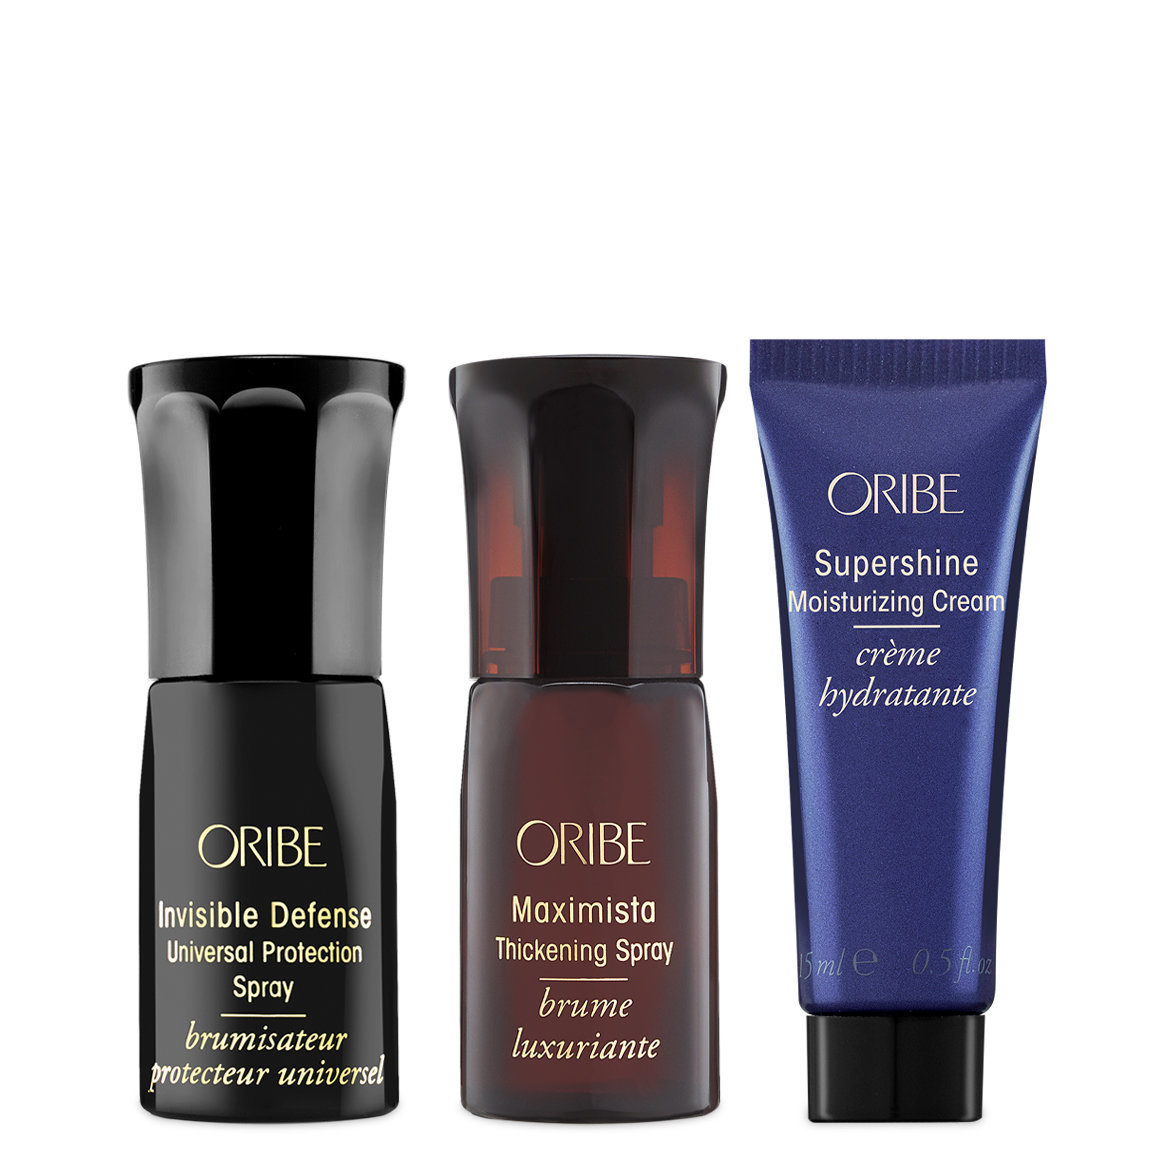 Free deluxe mini 3-piece Discovery Kit with qualifying Oribe purchase